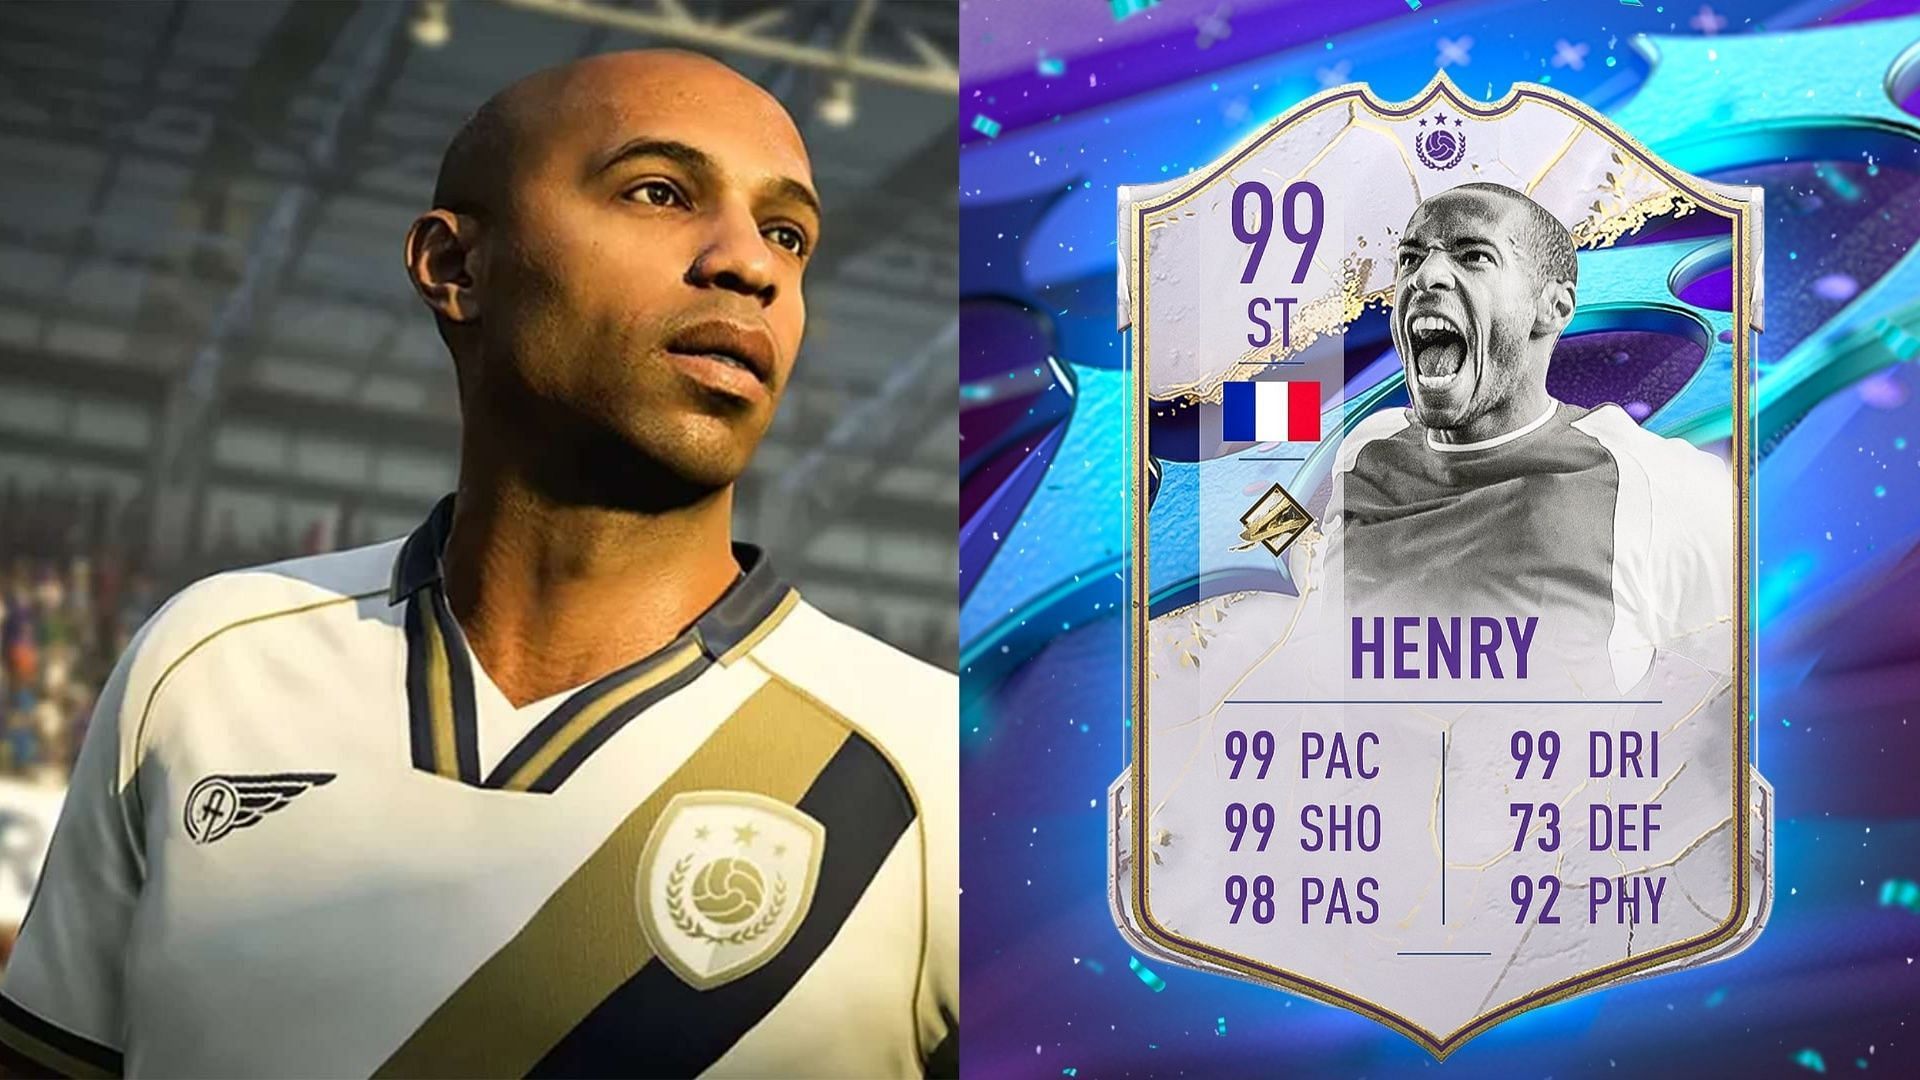 A new Cover Star Icon card has been leaked (Images via EA Sports, Twitter/FUT Sheriff)